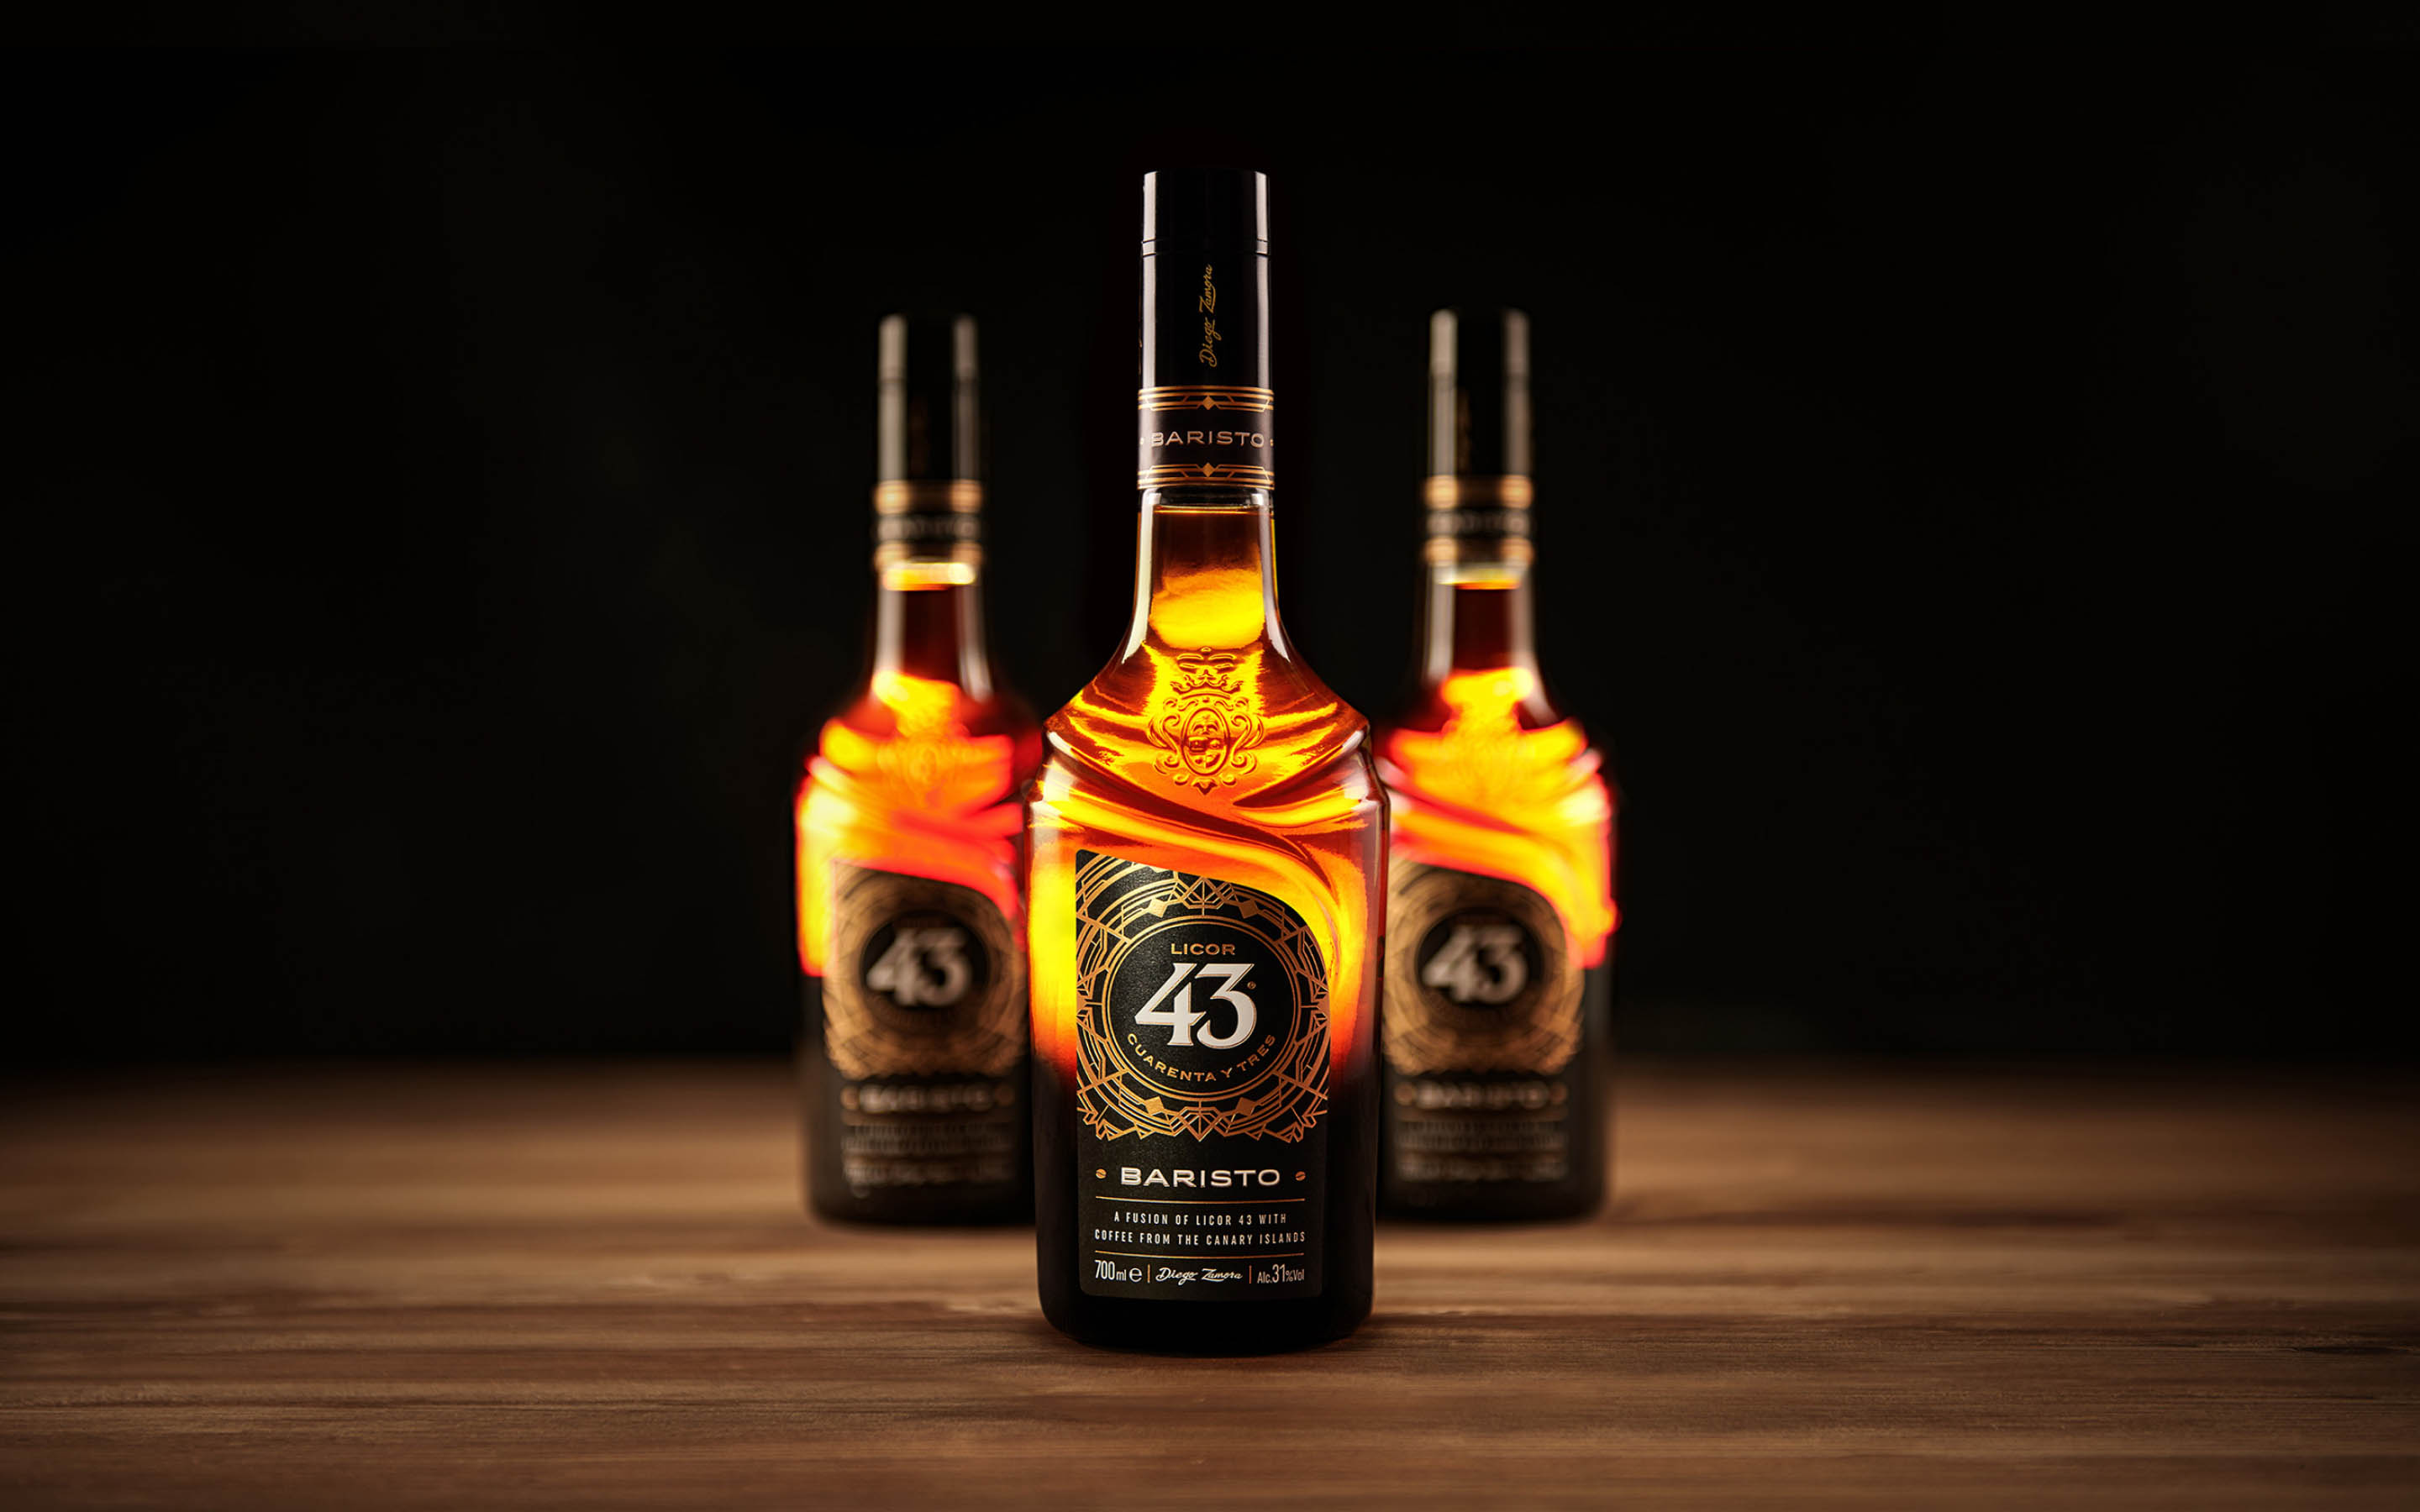 Licor 43 is the pride of the Zamora Company: a family recipe that became the Spanish liqueur with the greatest international reach. With the European market in mind, they created a special edition: Licor 43 Baristo, which included notes of coffee from Agaete, in the Canary Islands, in its legendary recipe. The essence of Spanish coffee culture, infused in a bottle.   
